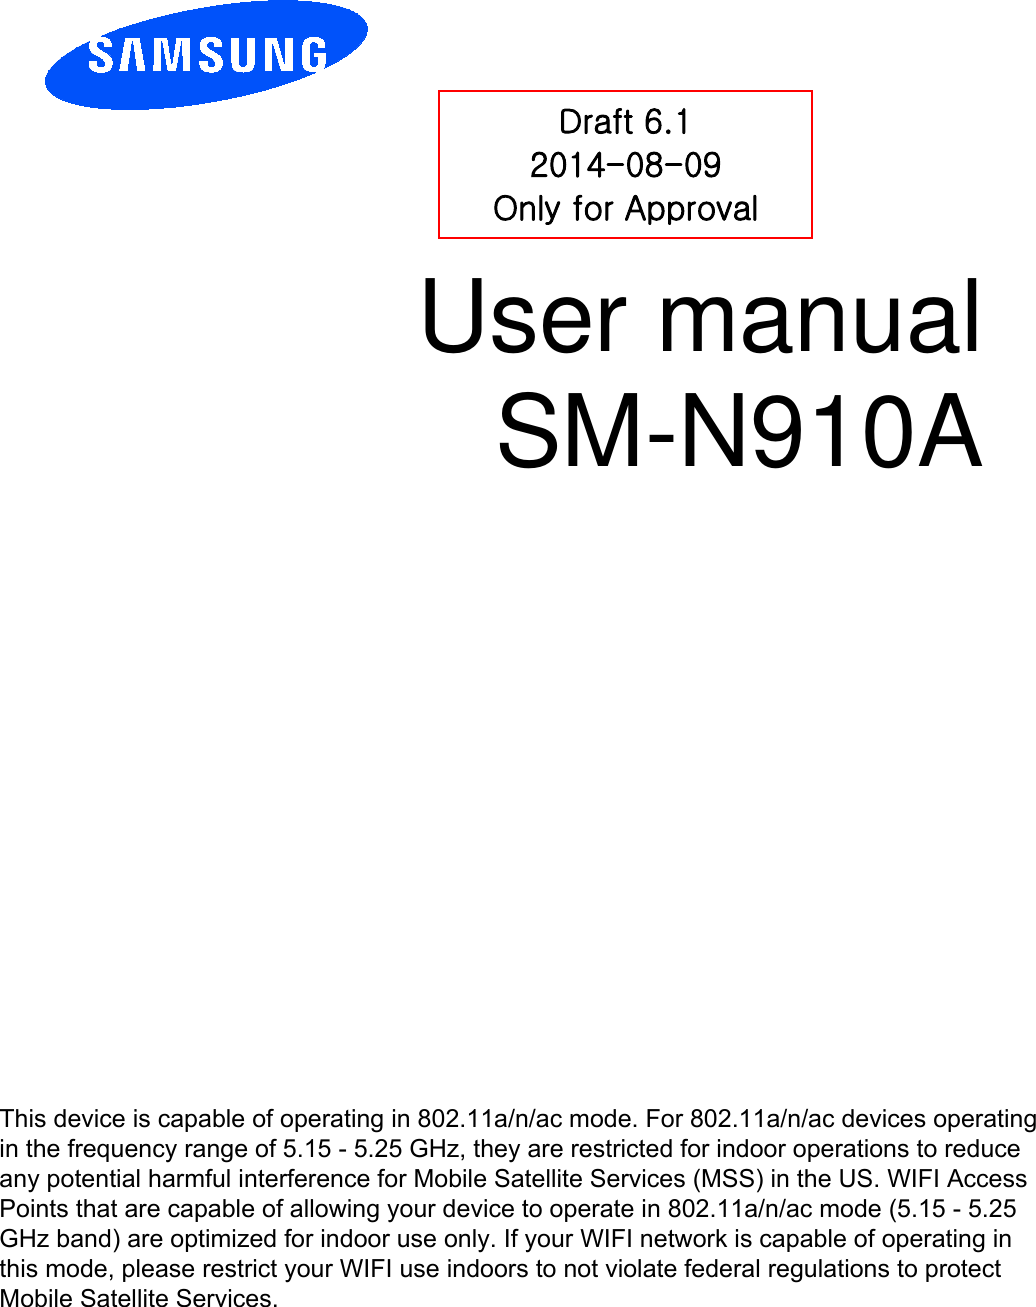 User manual SM-N910A Draft 6.1 2014-08-09 Only for Approval This device is capable of operating in 802.11a/n/ac mode. For 802.11a/n/ac devices operating in the frequency range of 5.15 - 5.25 GHz, they are restricted for indoor operations to reduce any potential harmful interference for Mobile Satellite Services (MSS) in the US. WIFI Access Points that are capable of allowing your device to operate in 802.11a/n/ac mode (5.15 - 5.25 GHz band) are optimized for indoor use only. If your WIFI network is capable of operating in this mode, please restrict your WIFI use indoors to not violate federal regulations to protect Mobile Satellite Services. 